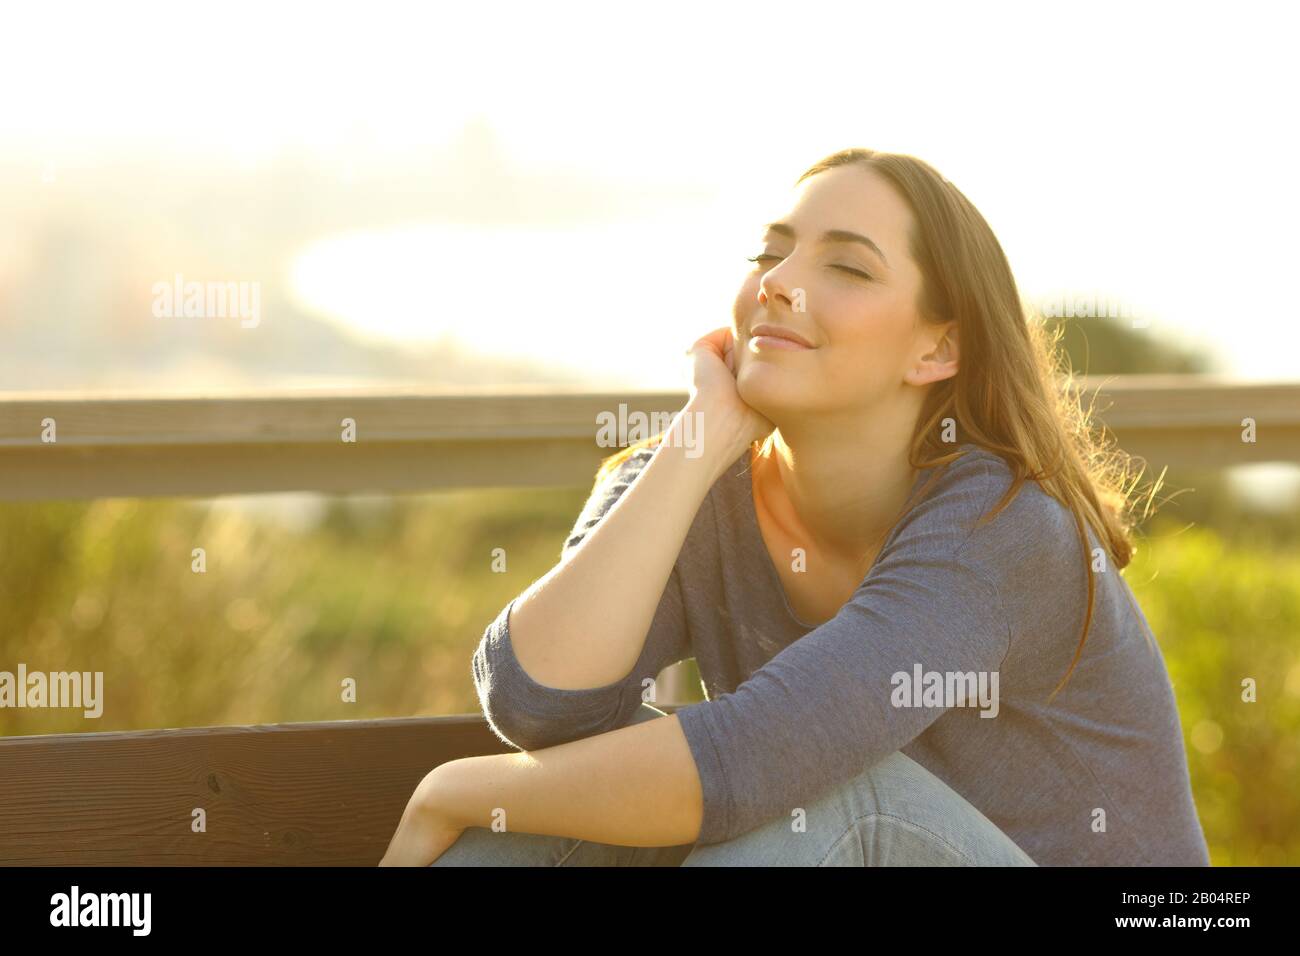 Satisfied woman relaxing sitting on a bench at sunset outdoors in city outskirts Stock Photo